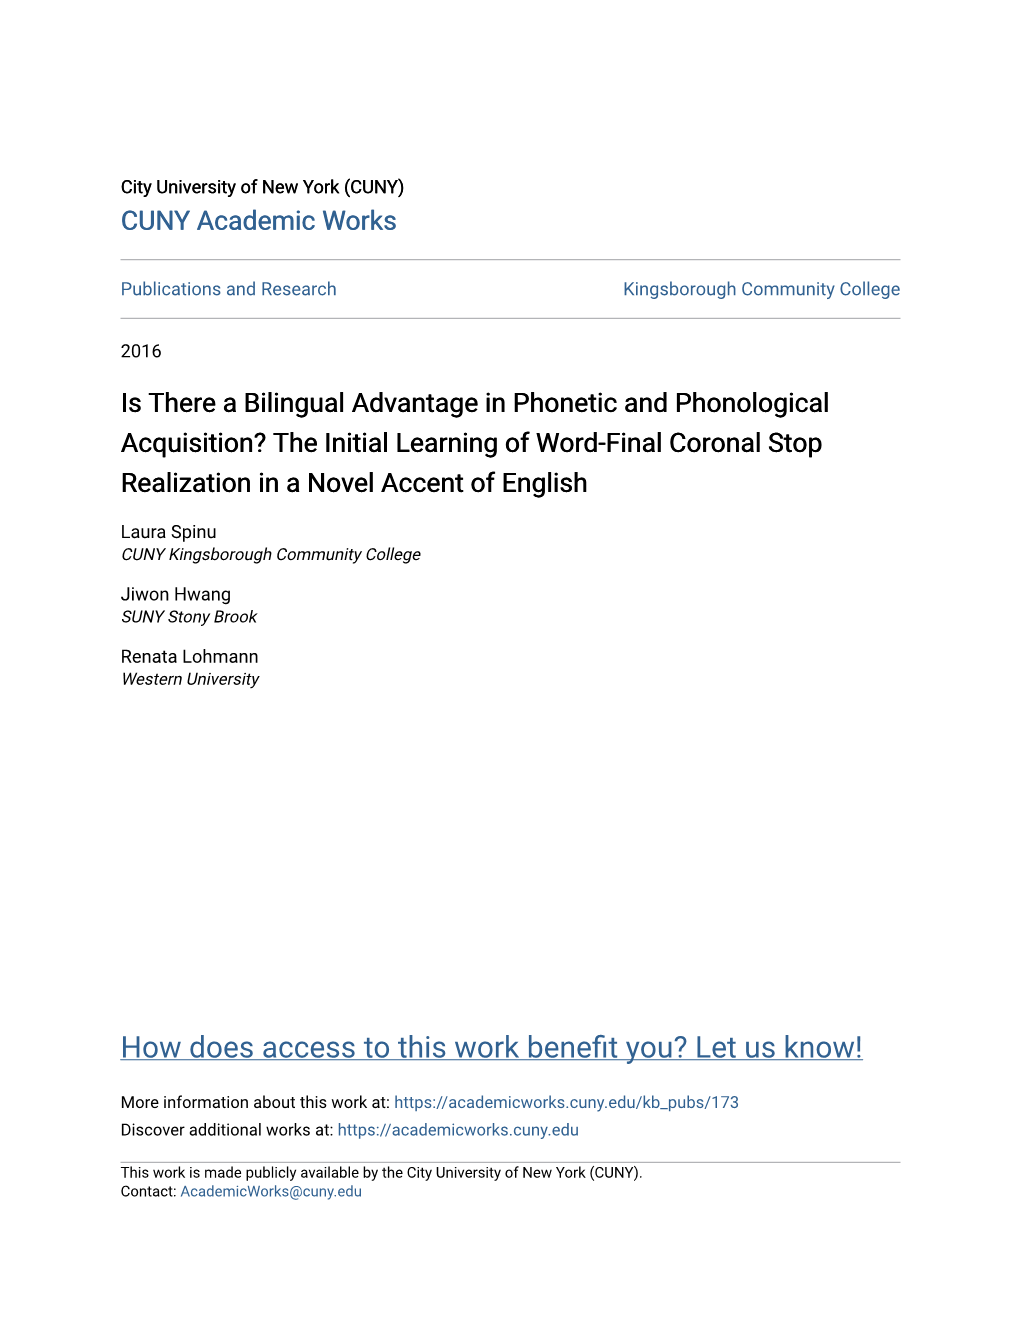 Is There a Bilingual Advantage in Phonetic and Phonological Acquisition? the Initial Learning of Word-Final Coronal Stop Realization in a Novel Accent of English